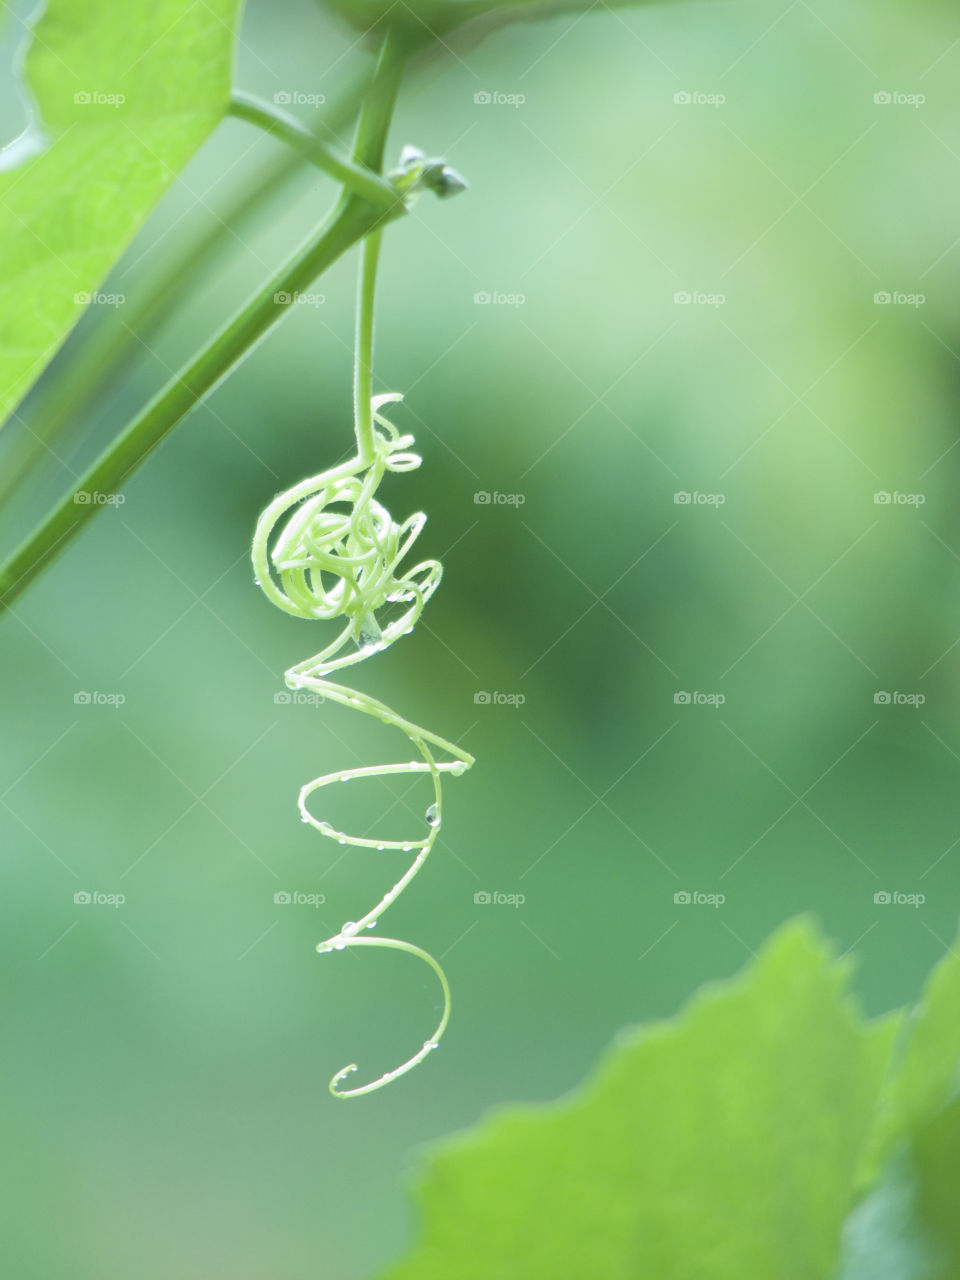 A green vine tendril against a green background which is blurred